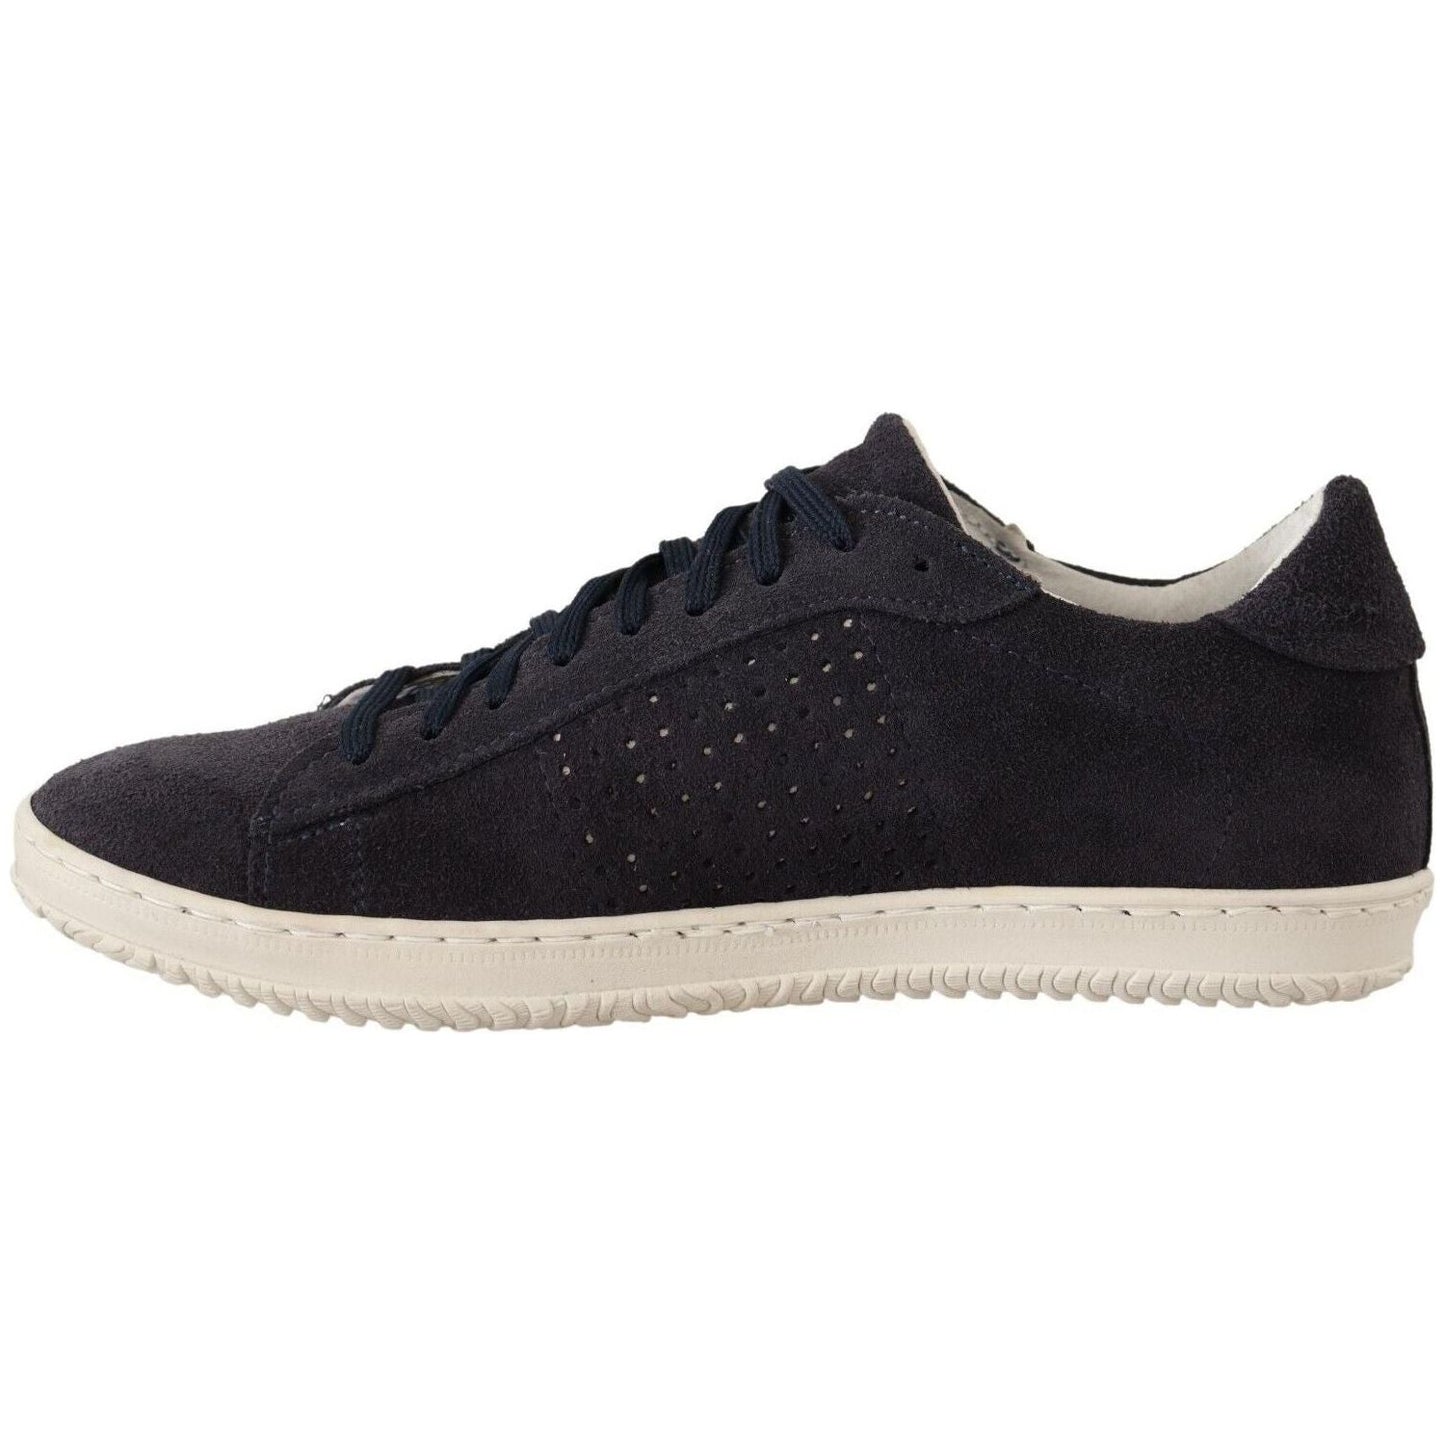 La Scarpa Italiana Elegant Suede Low Top Sneakers black-suede-perforated-lace-up-sneakers-shoes MAN SNEAKERS s-l1600-1-140-28e23f3b-e23.jpg